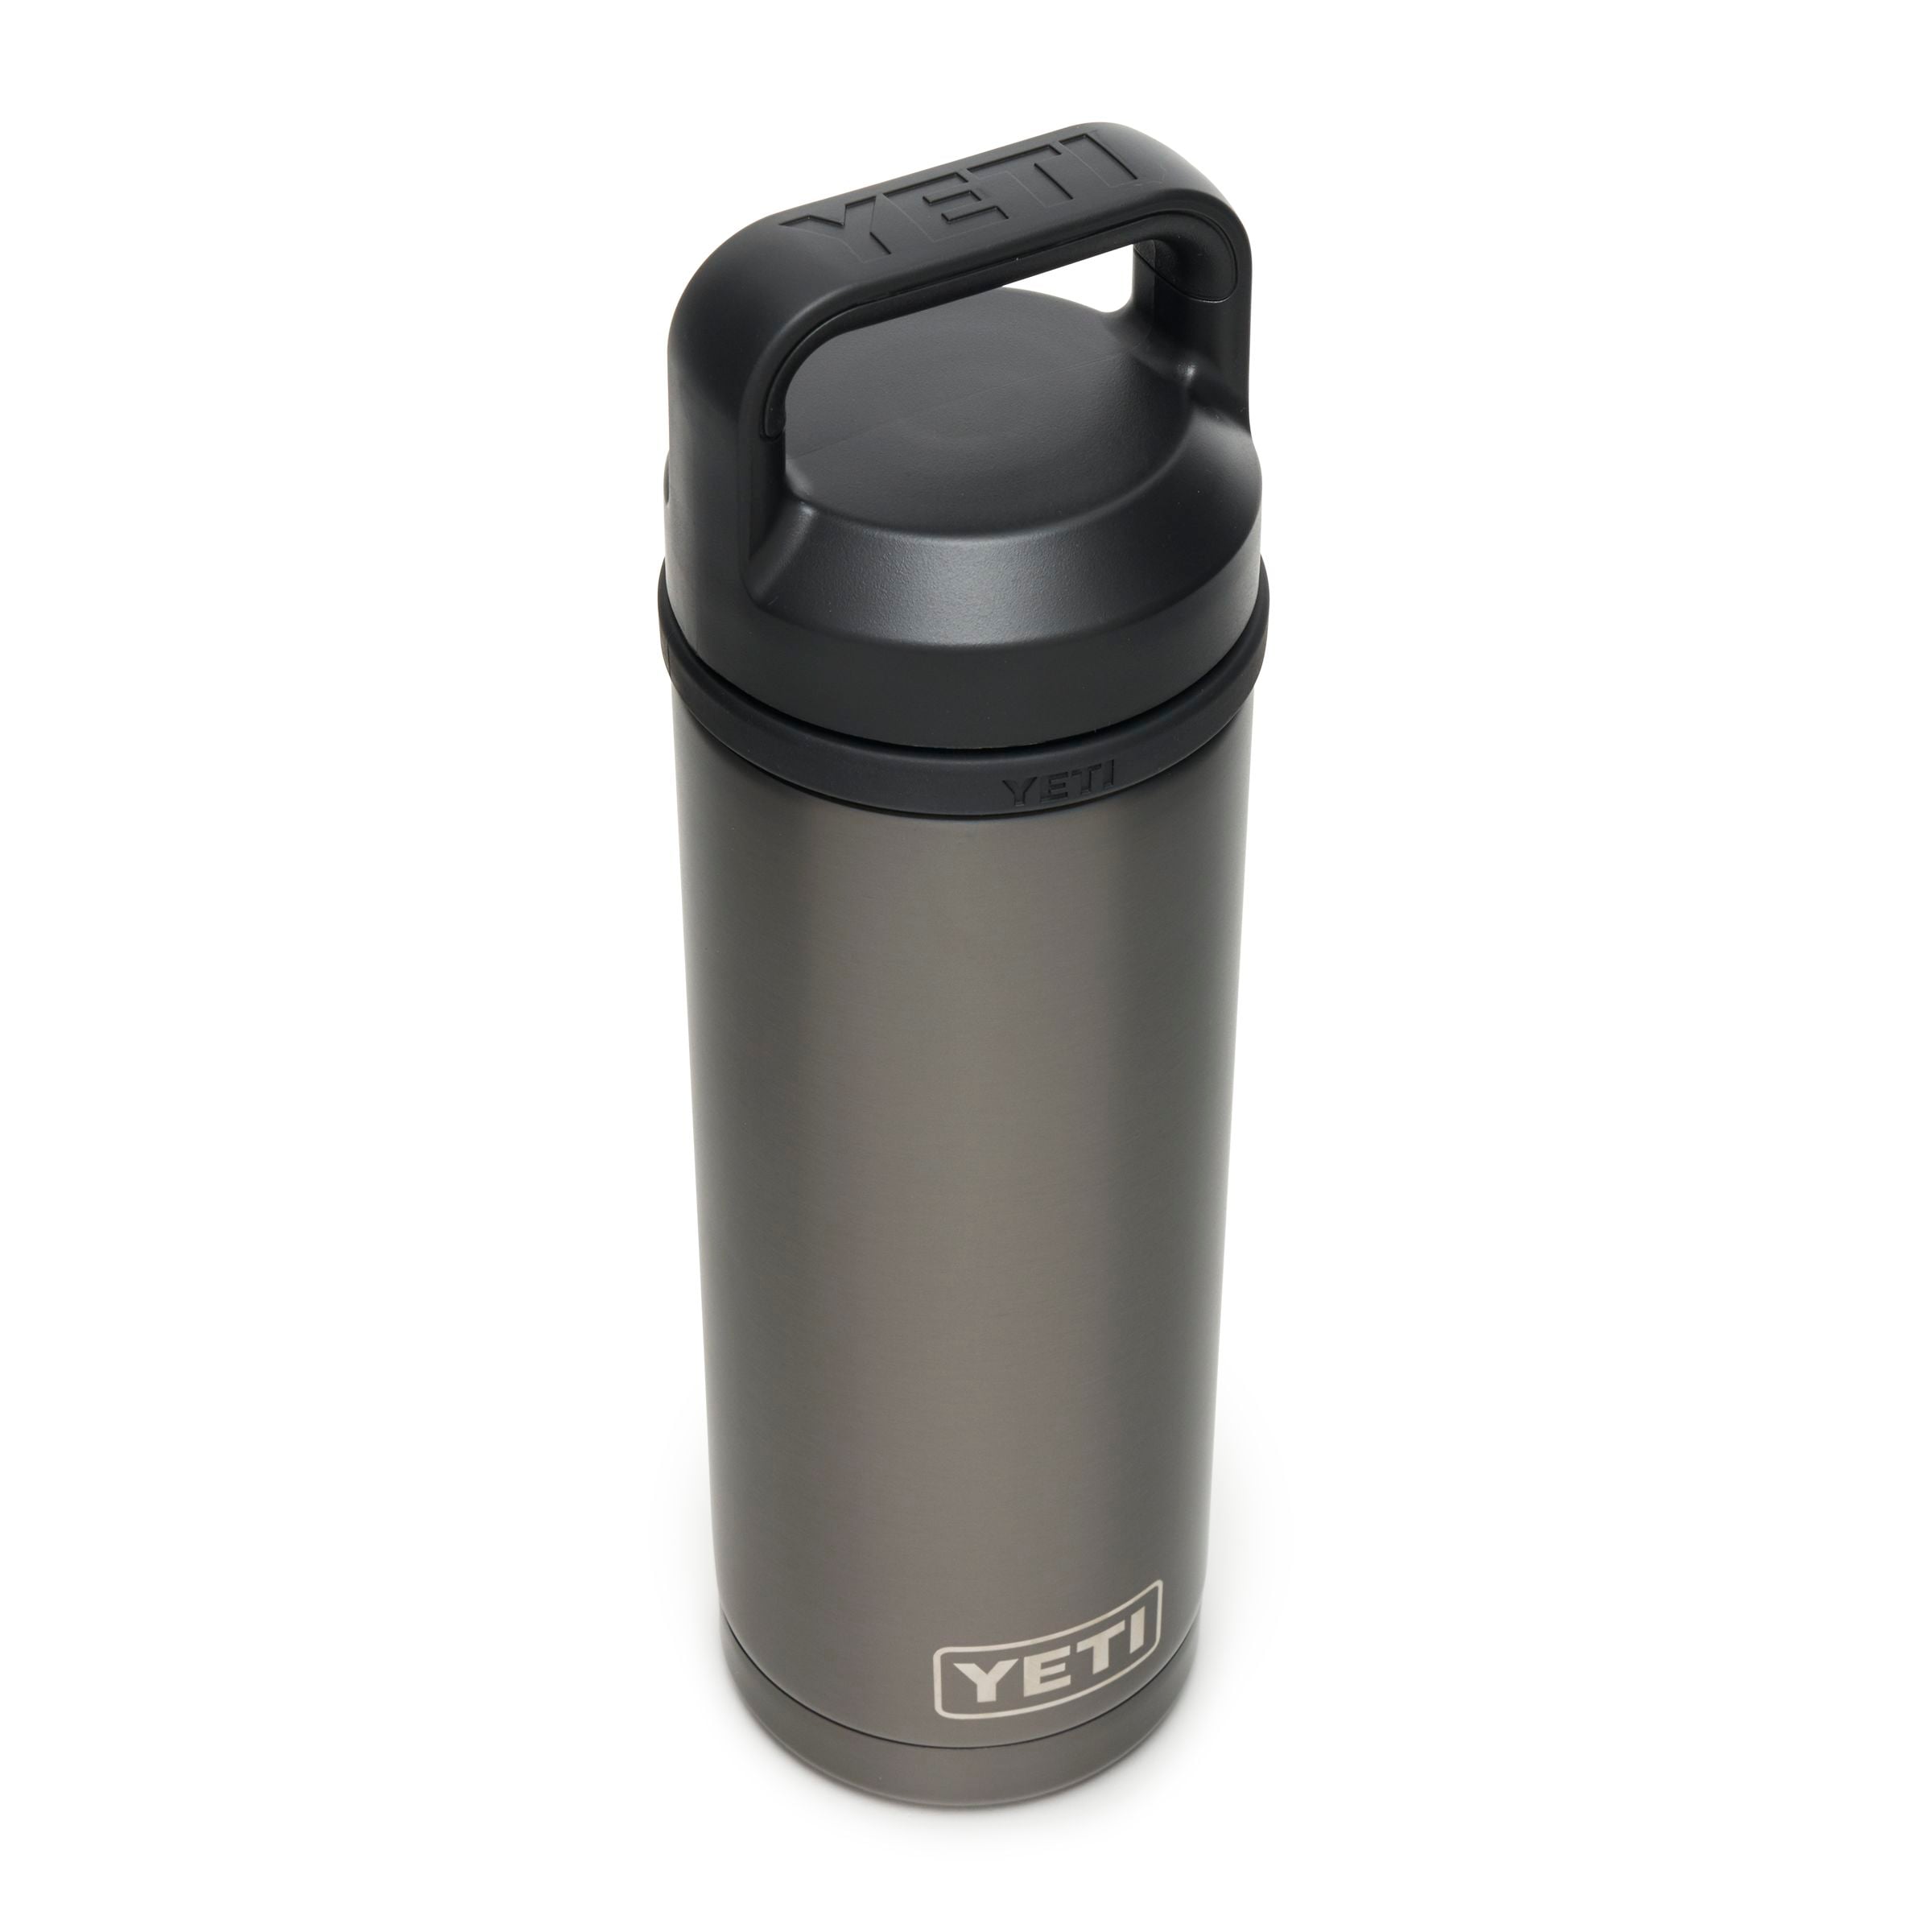 Yeti Rambler 18 Oz. Silver Stainless Steel Insulated Vacuum Bottle